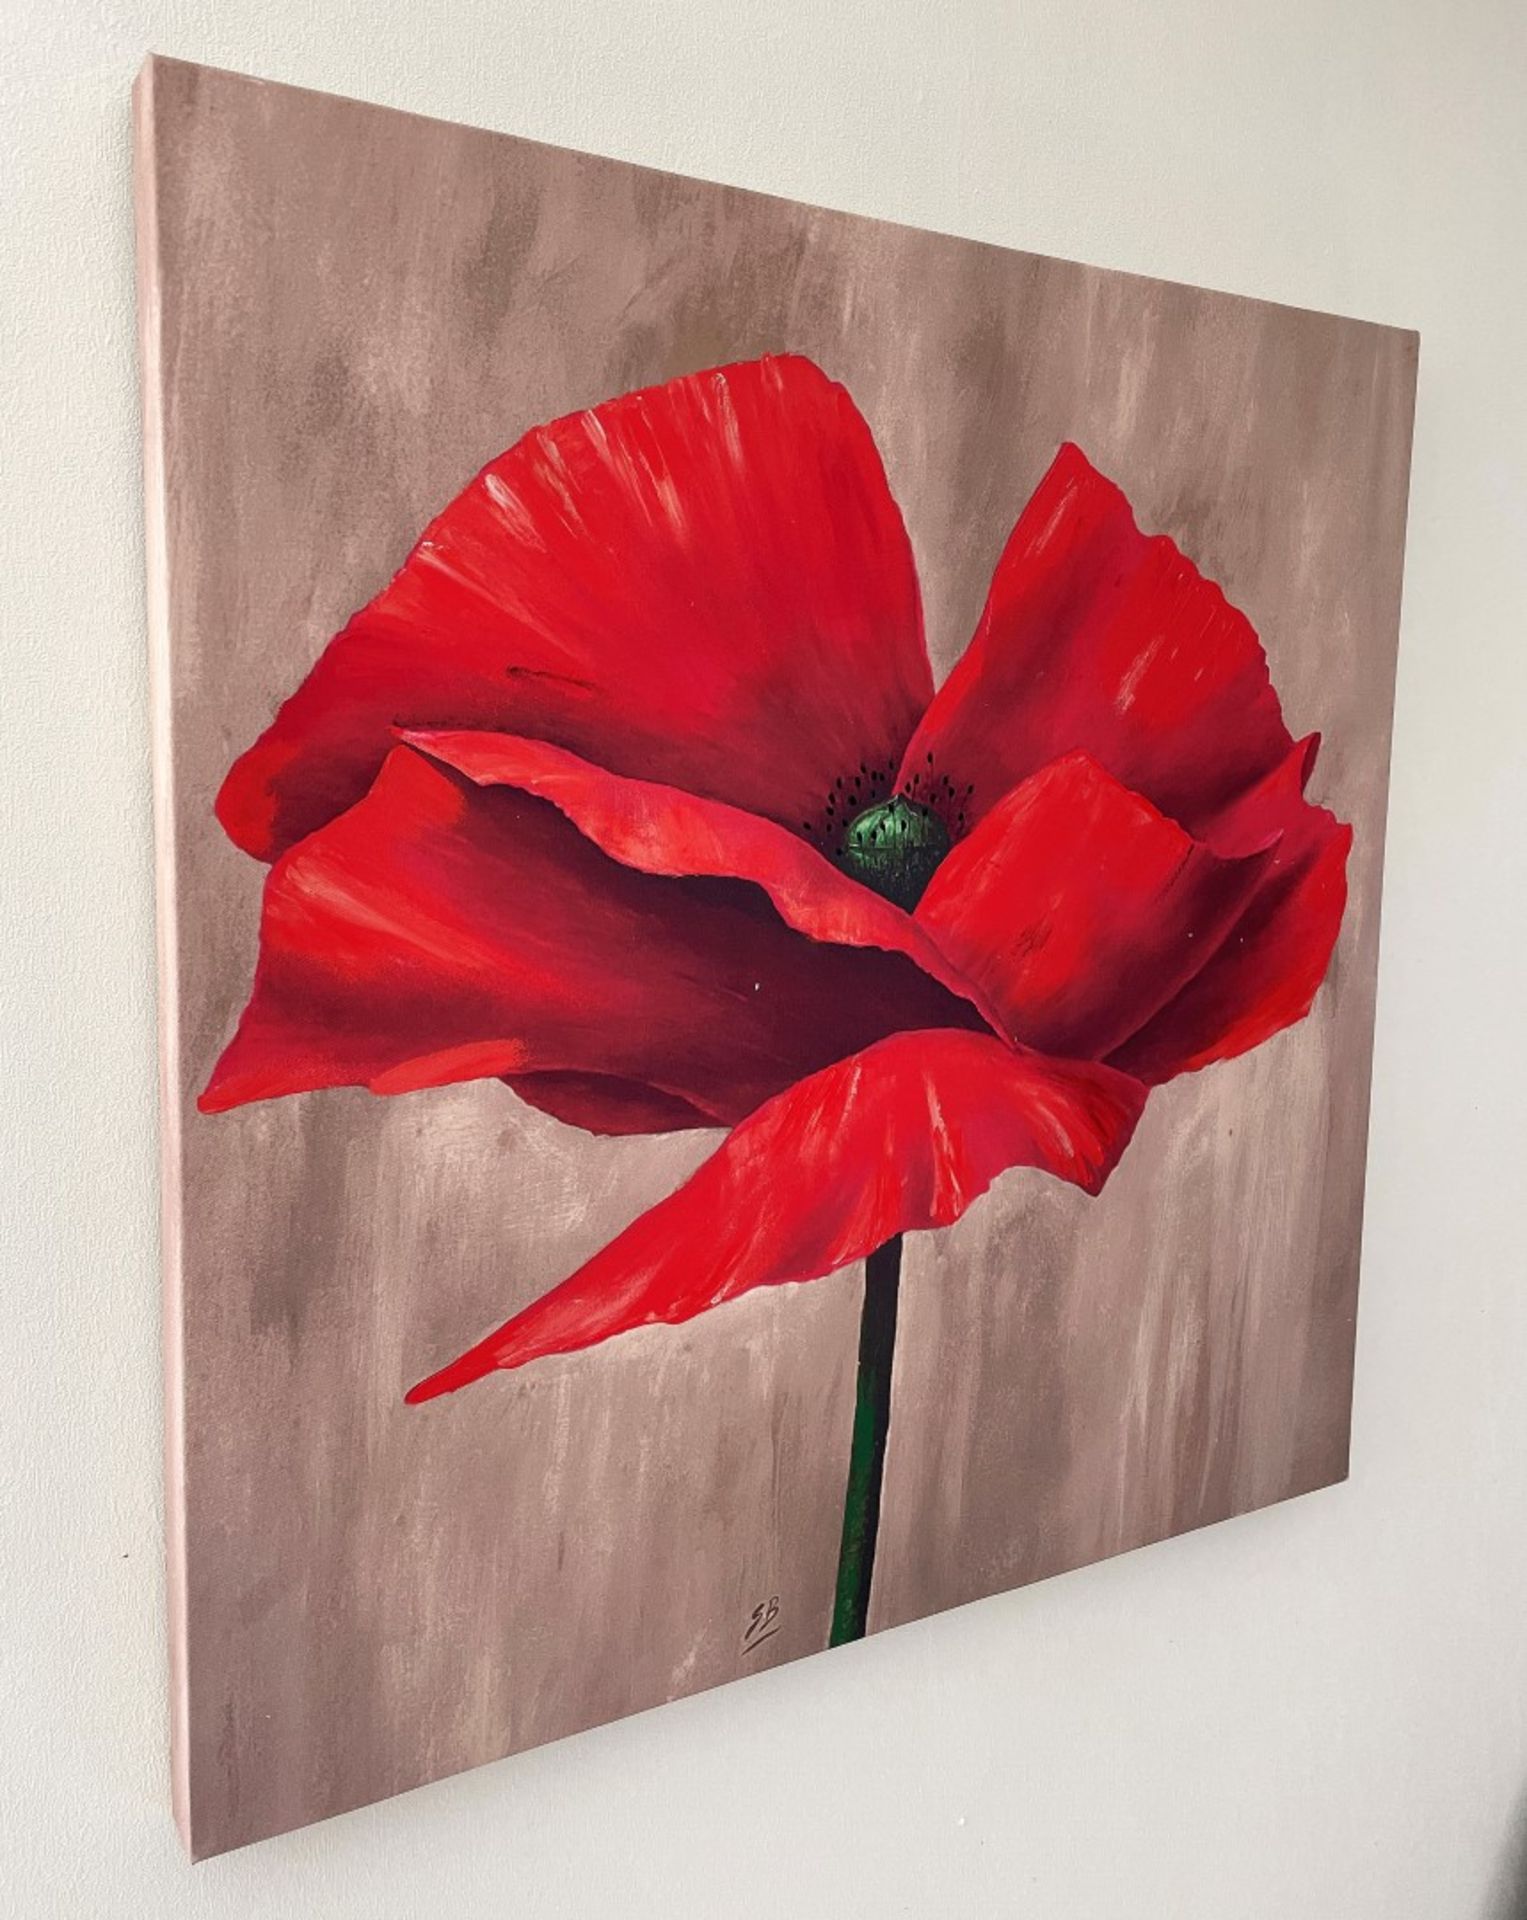 1 x Poppy Art Print On Canvas - Dimensions: 76 x 76cm - From An Exclusive Property In Leeds - No VAT